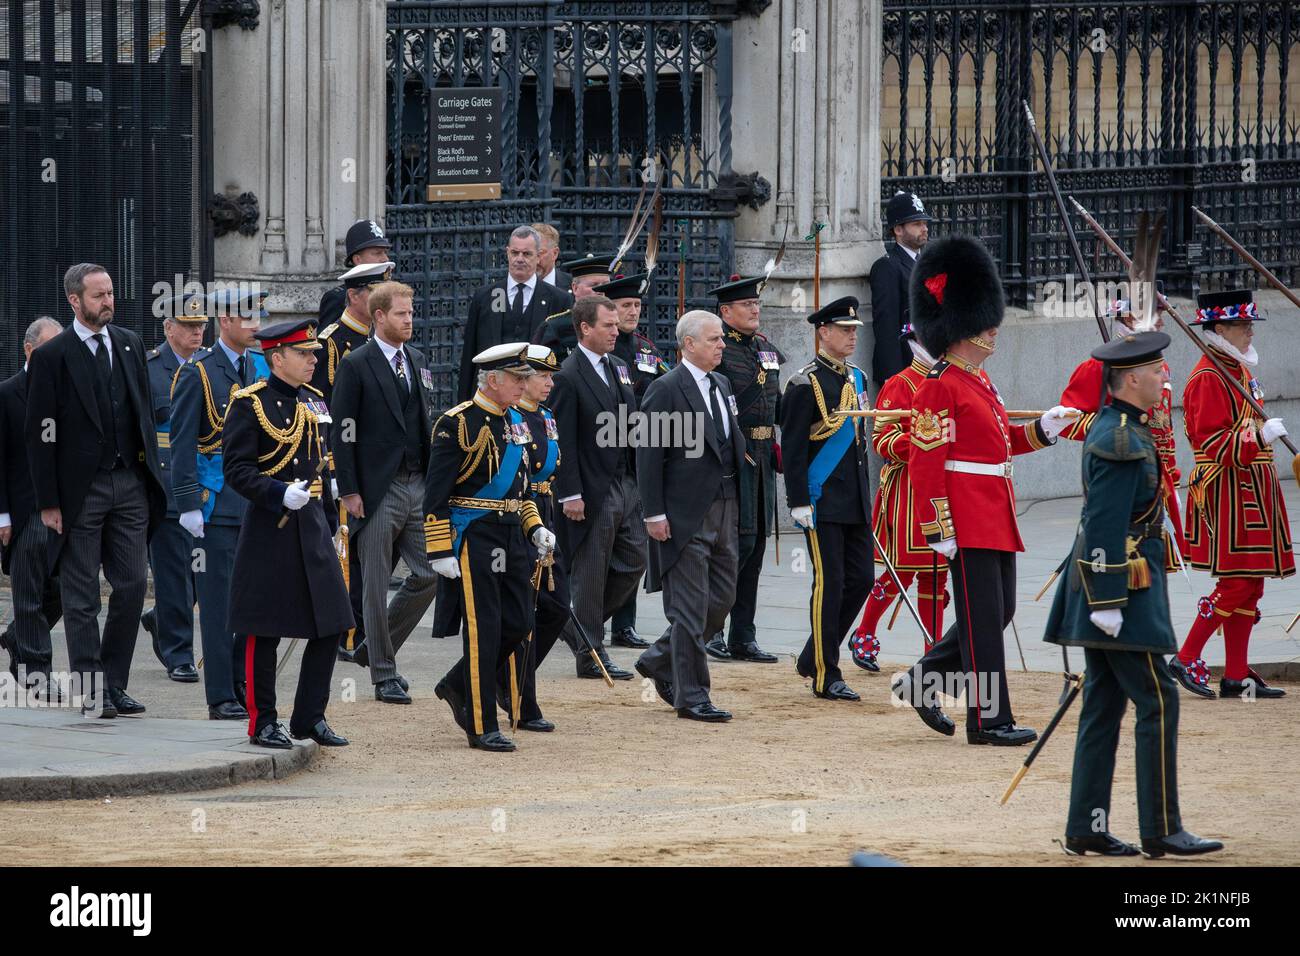 London, England. 19th September, 2022. The Queen's children and grandchildren follow her coffin to Westminster Abbey for the Monarch's State Funeral. The event held in London and Windsor  was one of the biggest  the country has ever seen. Credit: Kiki Streitberger / Alamy Live News Stock Photo